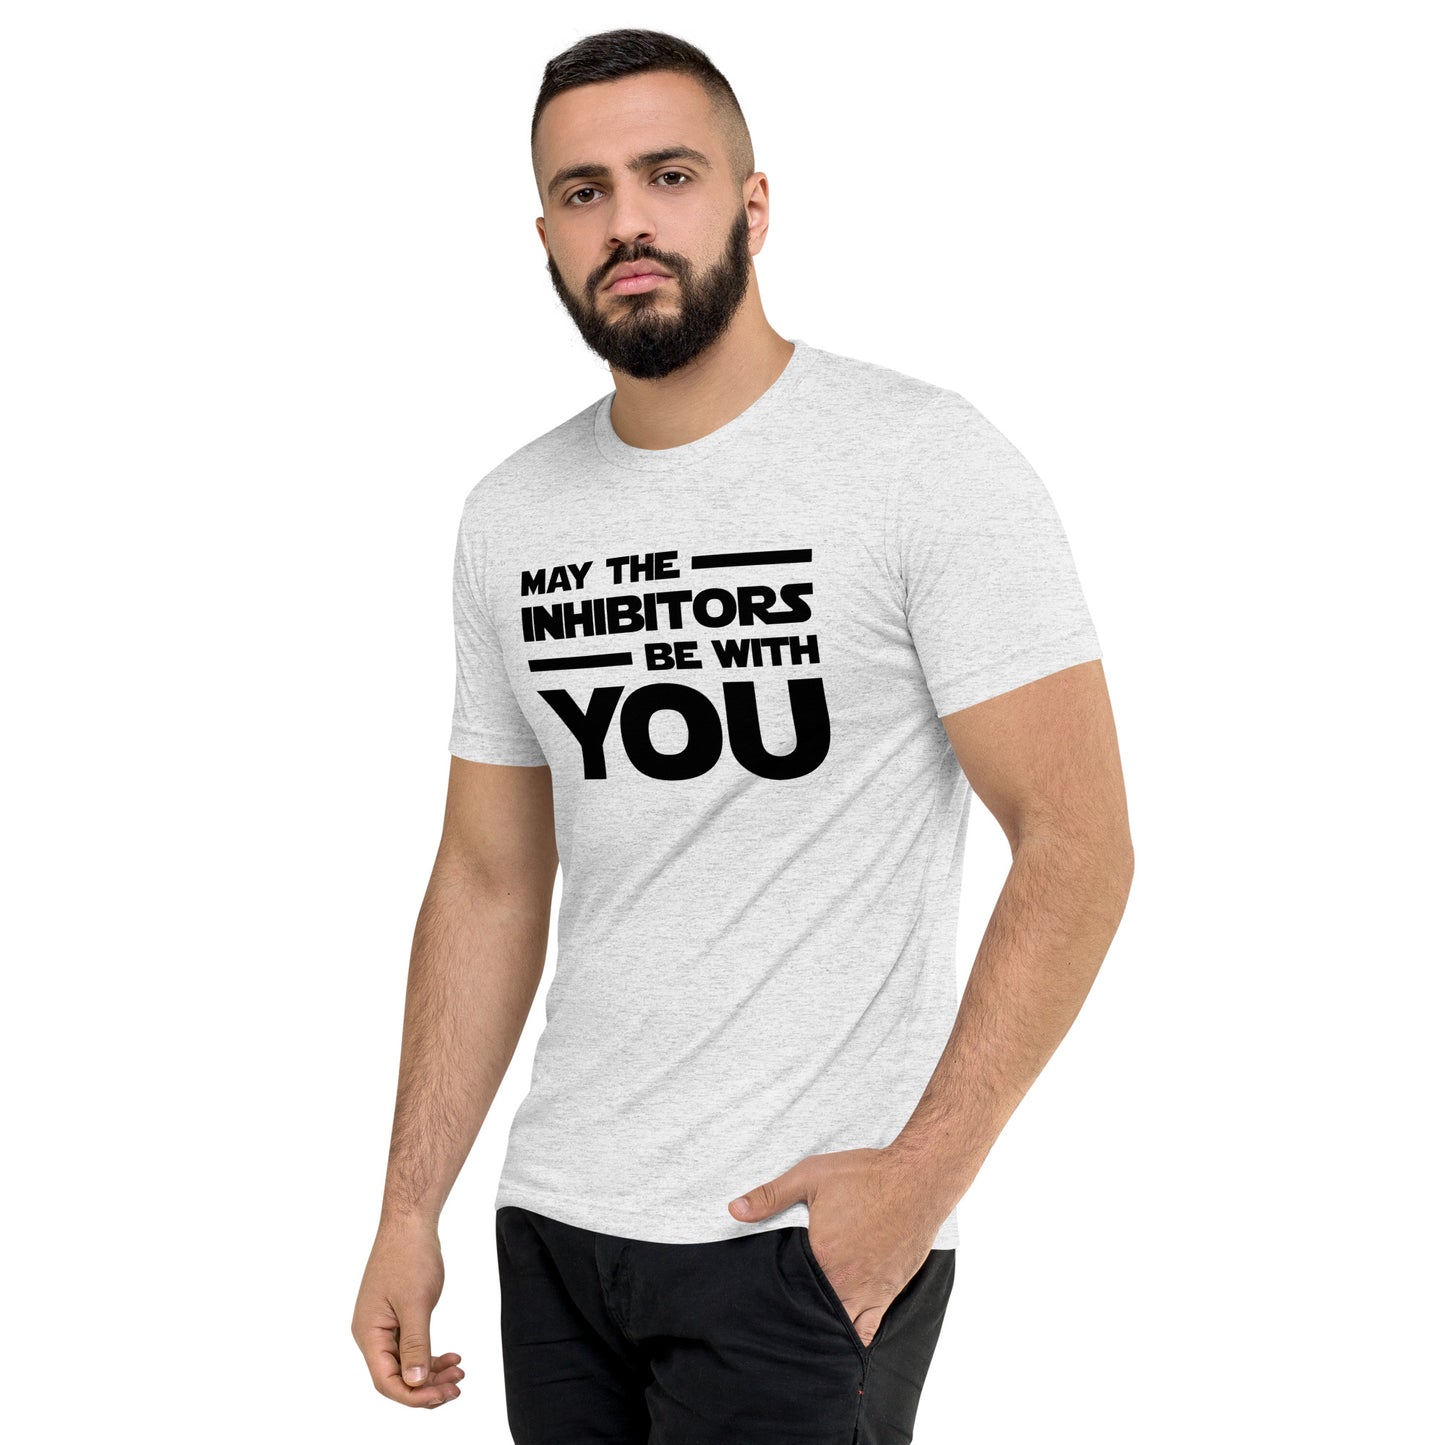 May The Inhibitors Be With You Premium Unisex Tri-Blend Short Sleeve T-Shirt